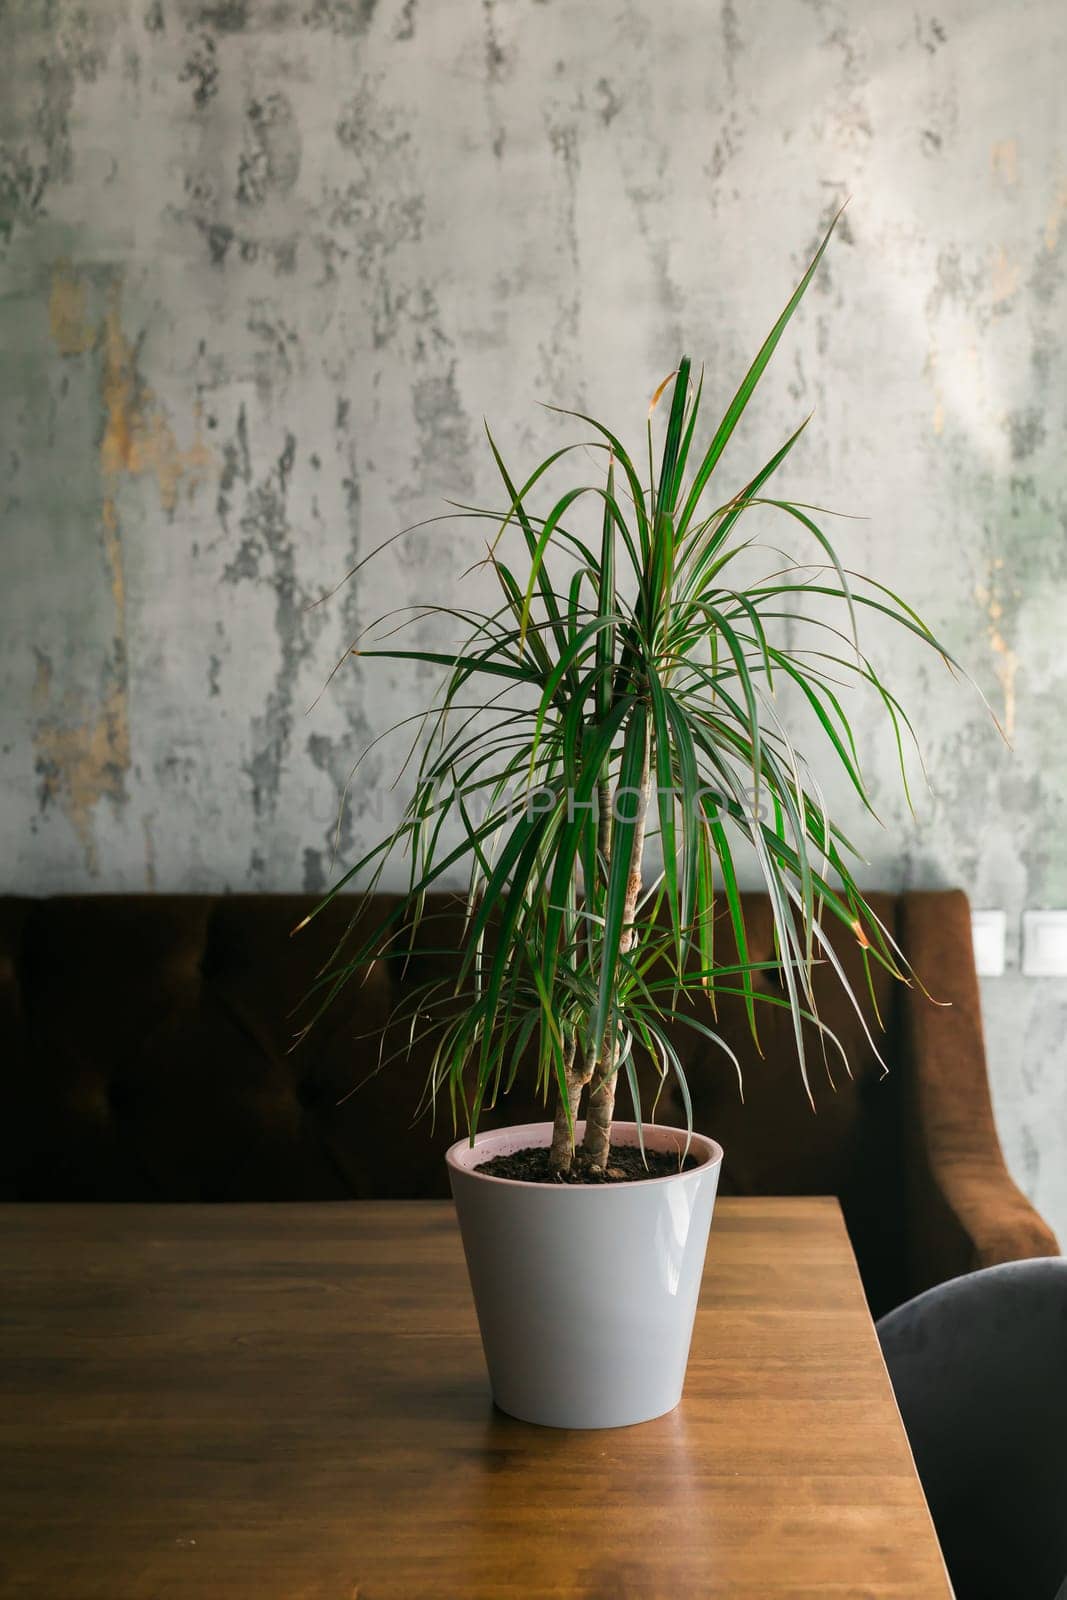 Room or restaurant decoration with plant in pot by Satura86